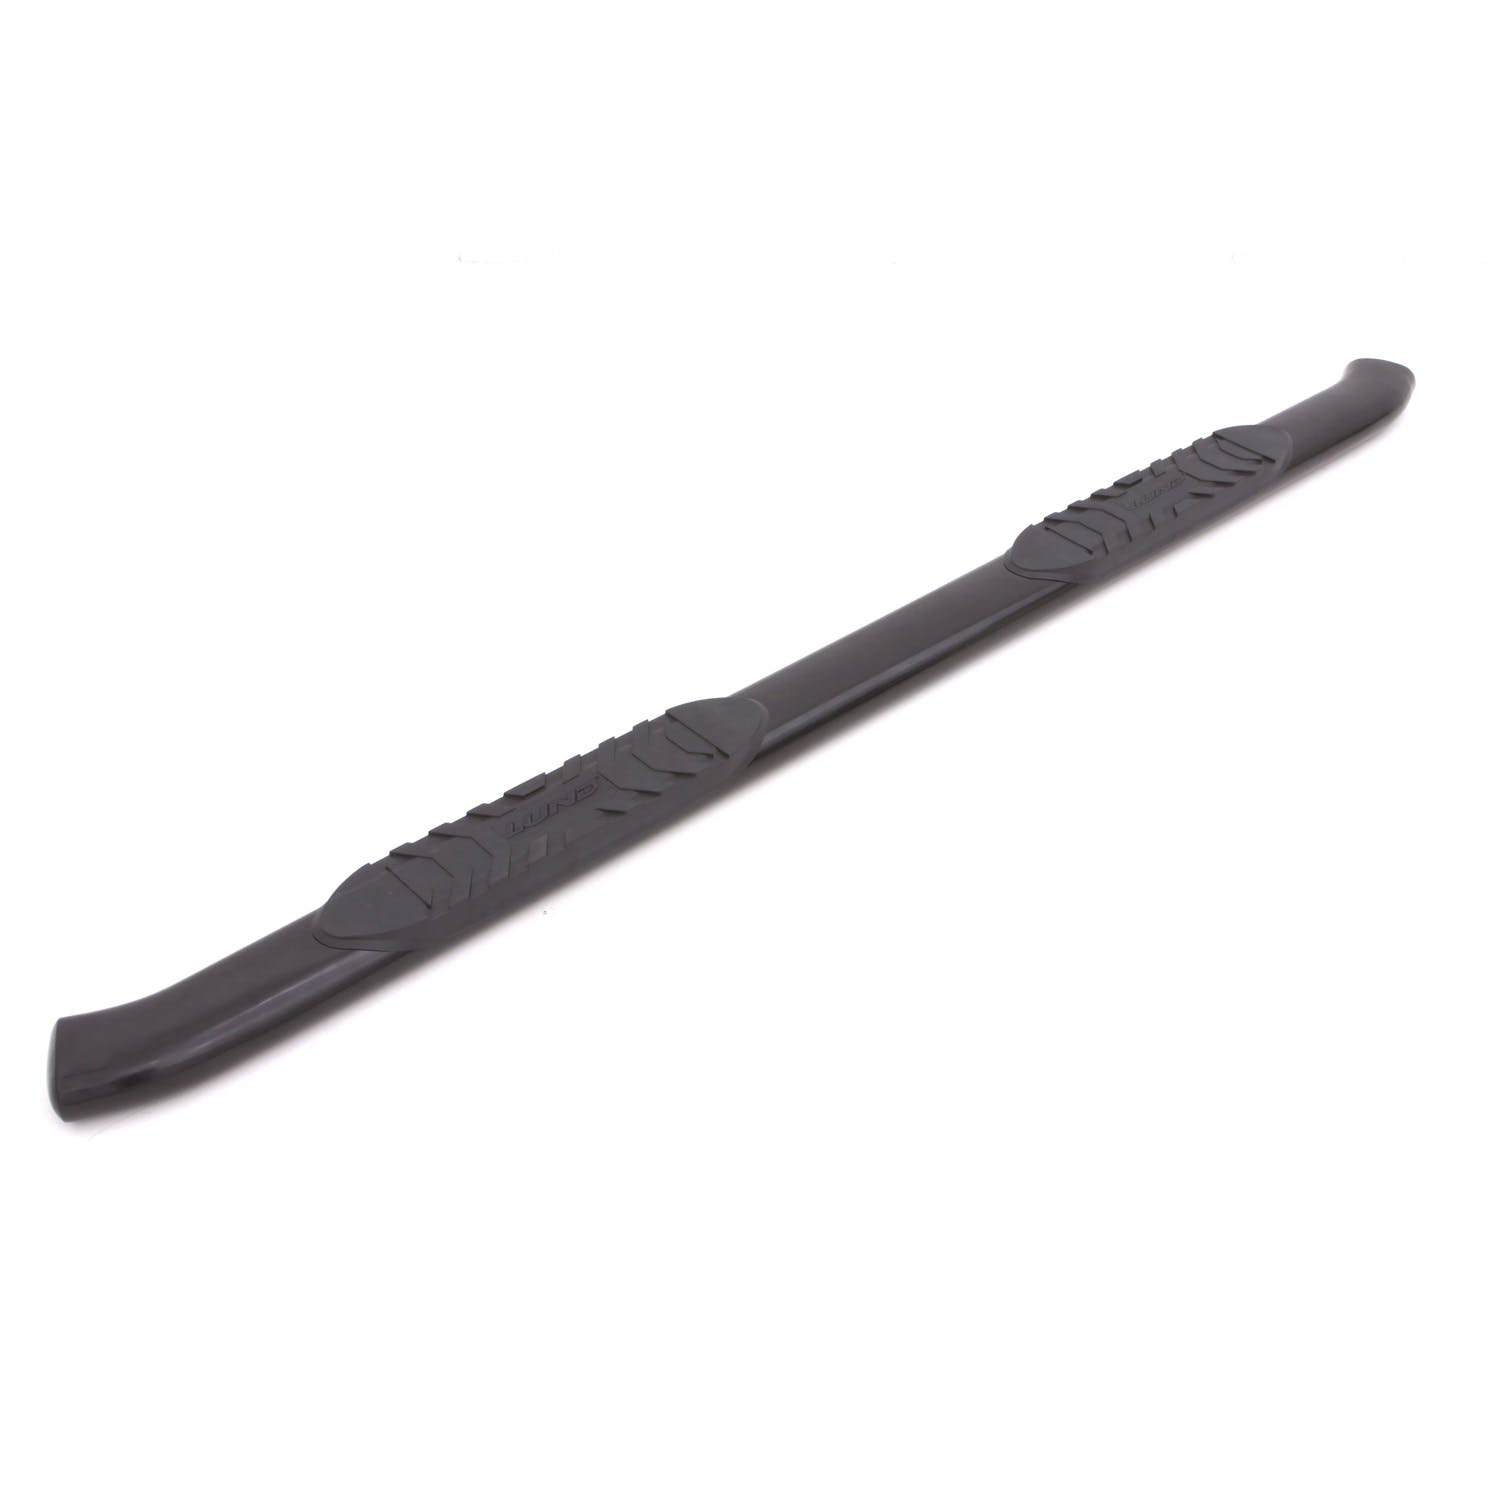 LUND 23885007 5 Inch Oval Curved Nerf Bar - Black 5 In OVAL CURVED STEEL